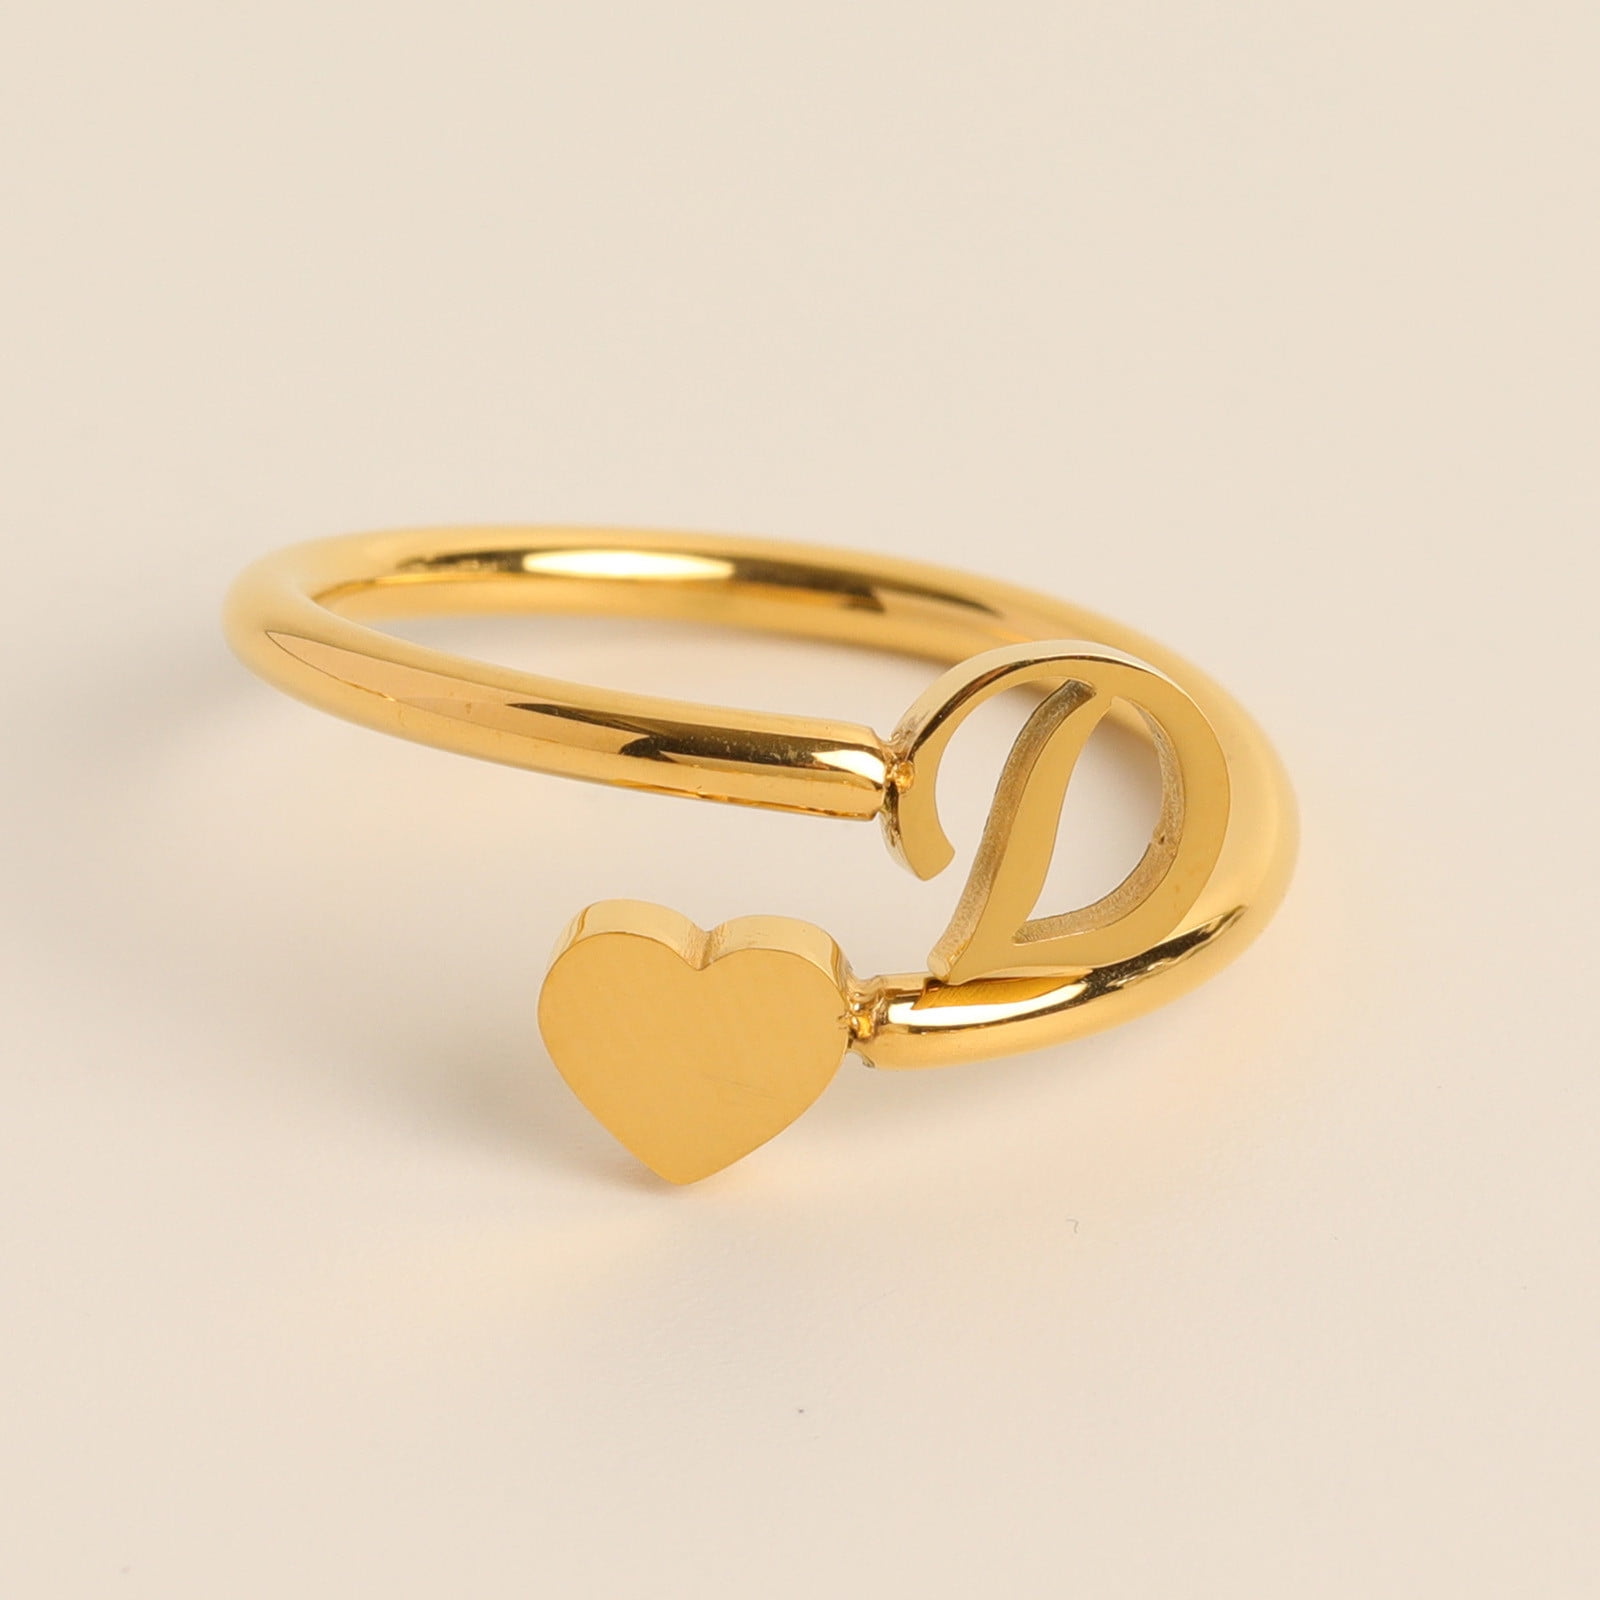 Flying Heart Ring by Anthony Lent - NEWTWIST